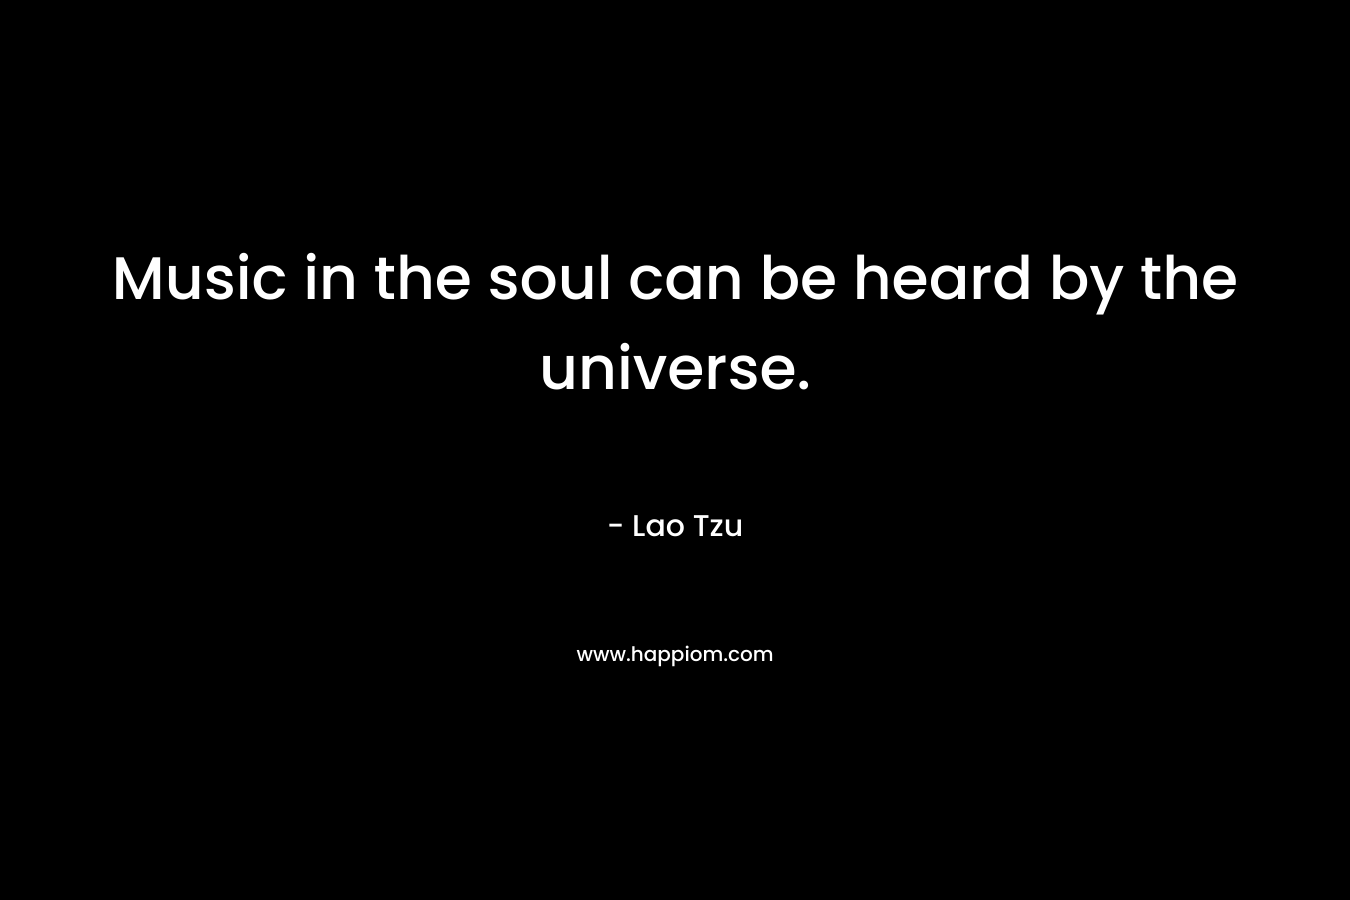 Music in the soul can be heard by the universe. – Lao Tzu